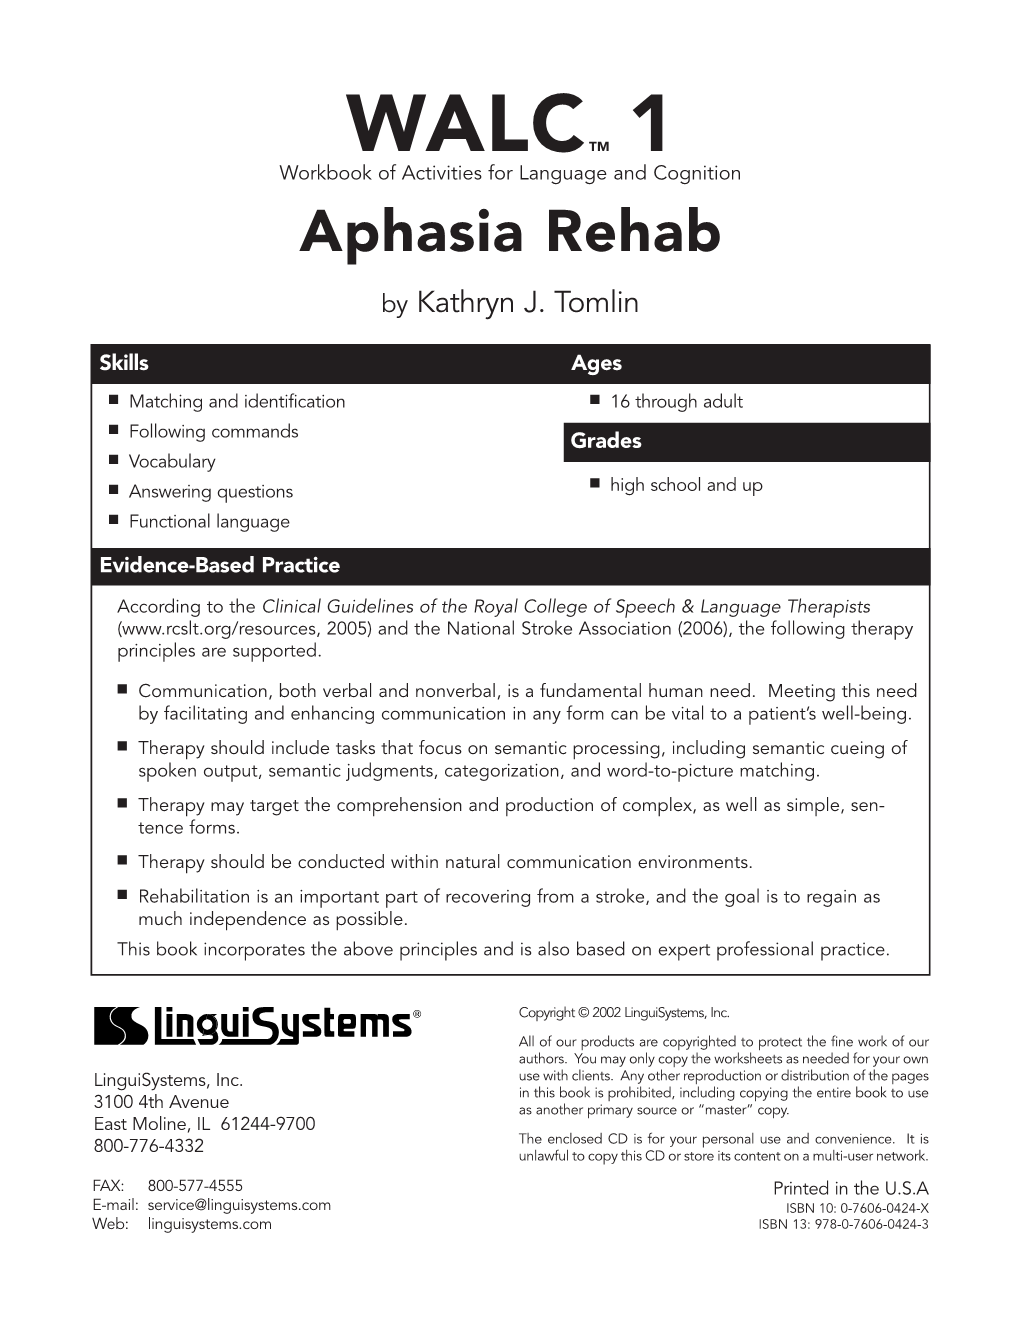 WALC 1: Aphasia Therapy